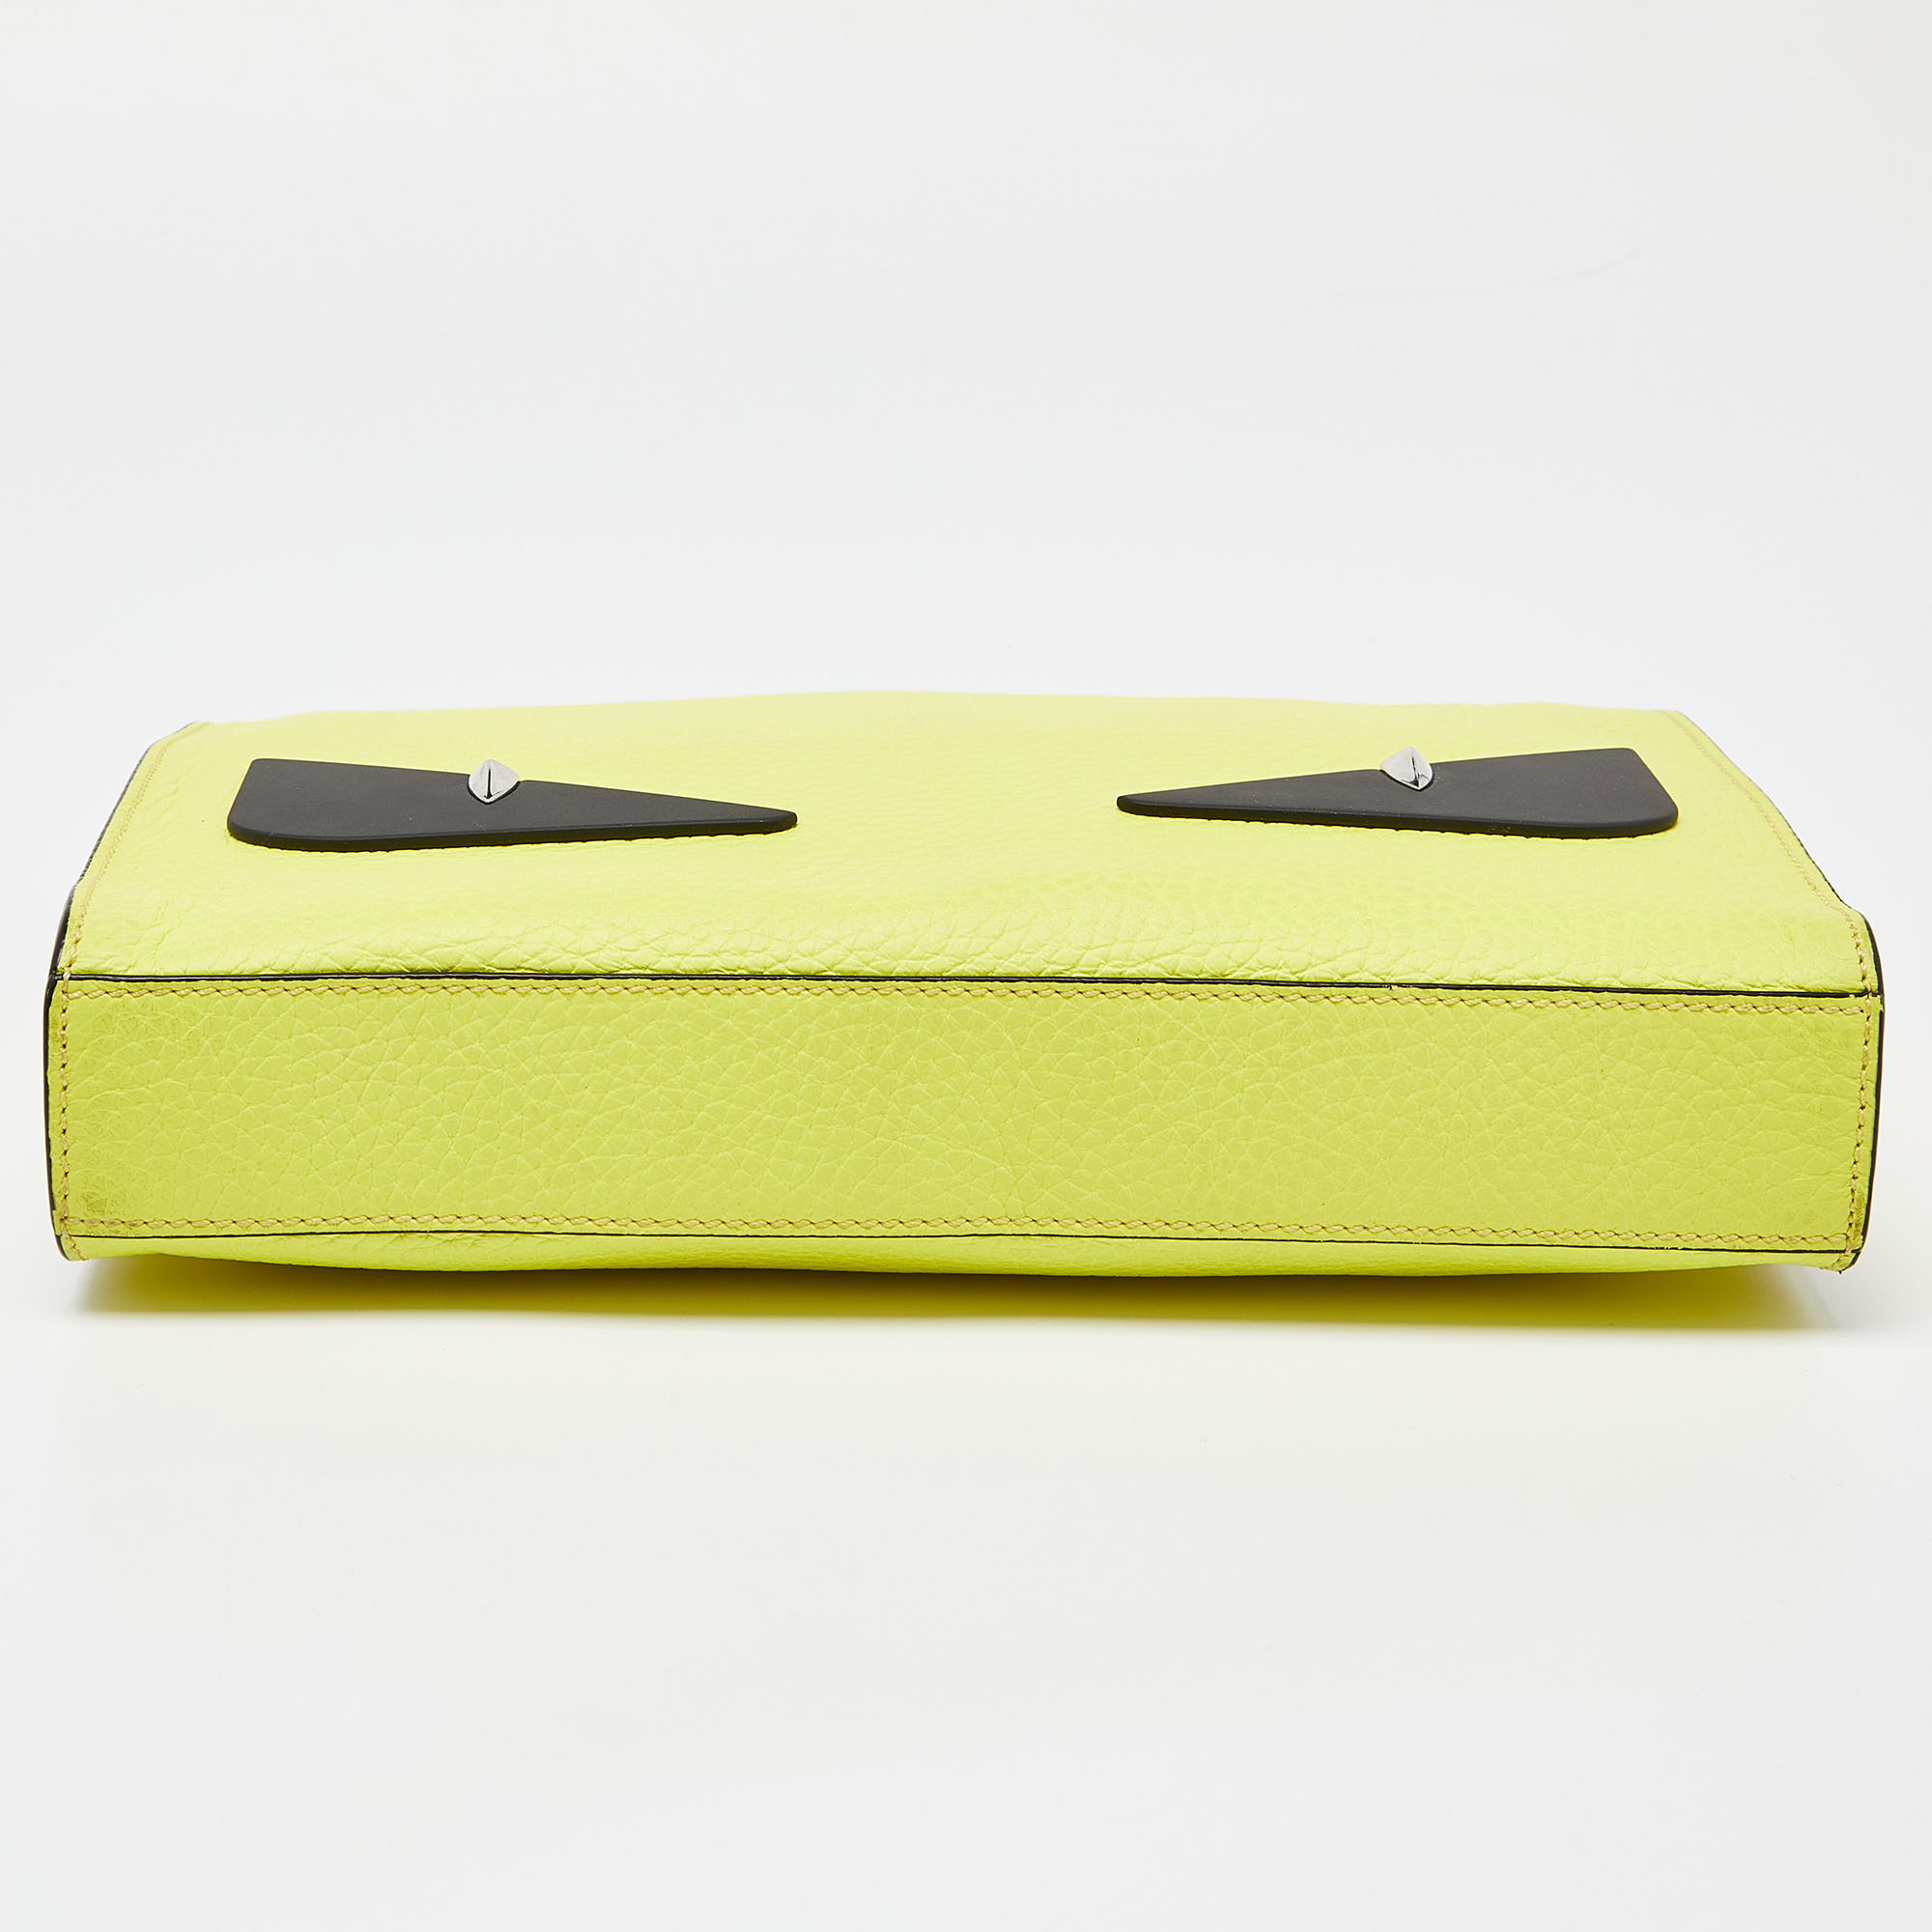 Fendi Yellow/Black Leather Monster Eyes Zip Pouch